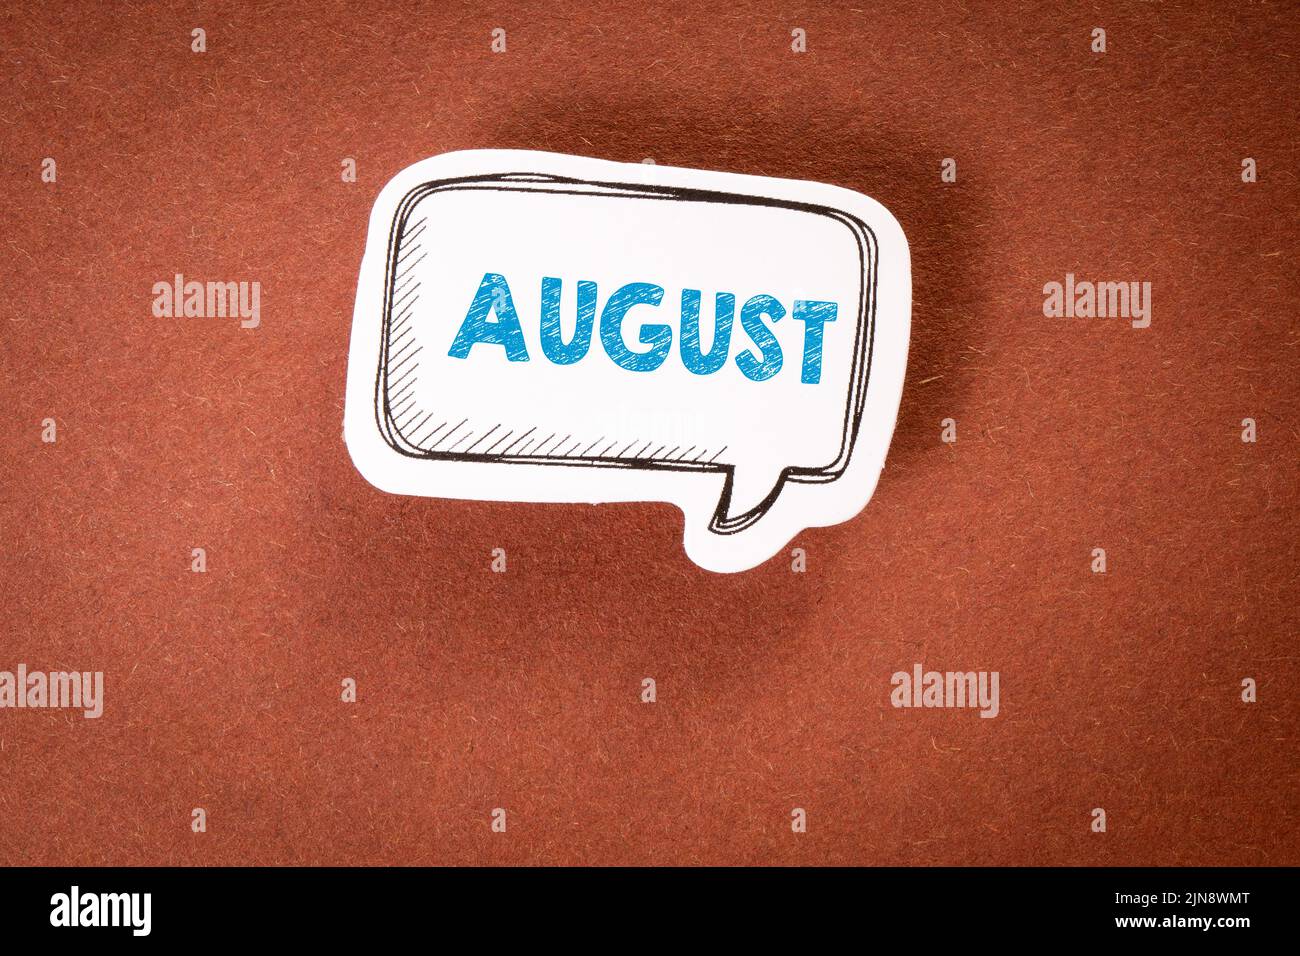 August. Planning and vacation concept. Speech bubble with text on brown background. Stock Photo